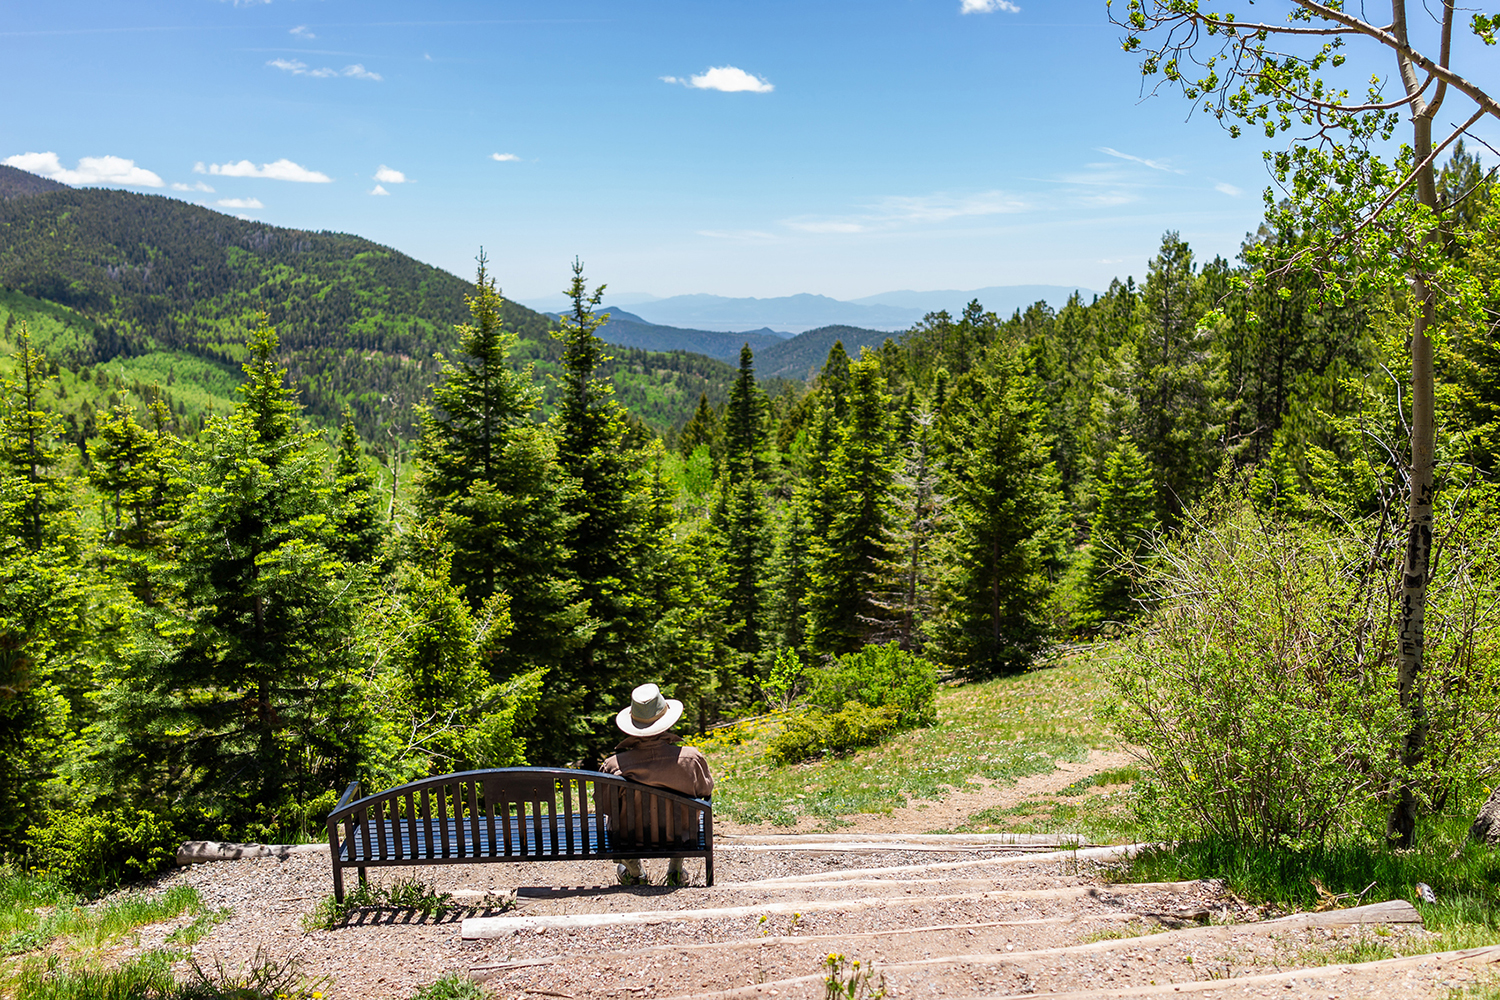 A sightseers views lush fir trees and mountains from a picnic bench.